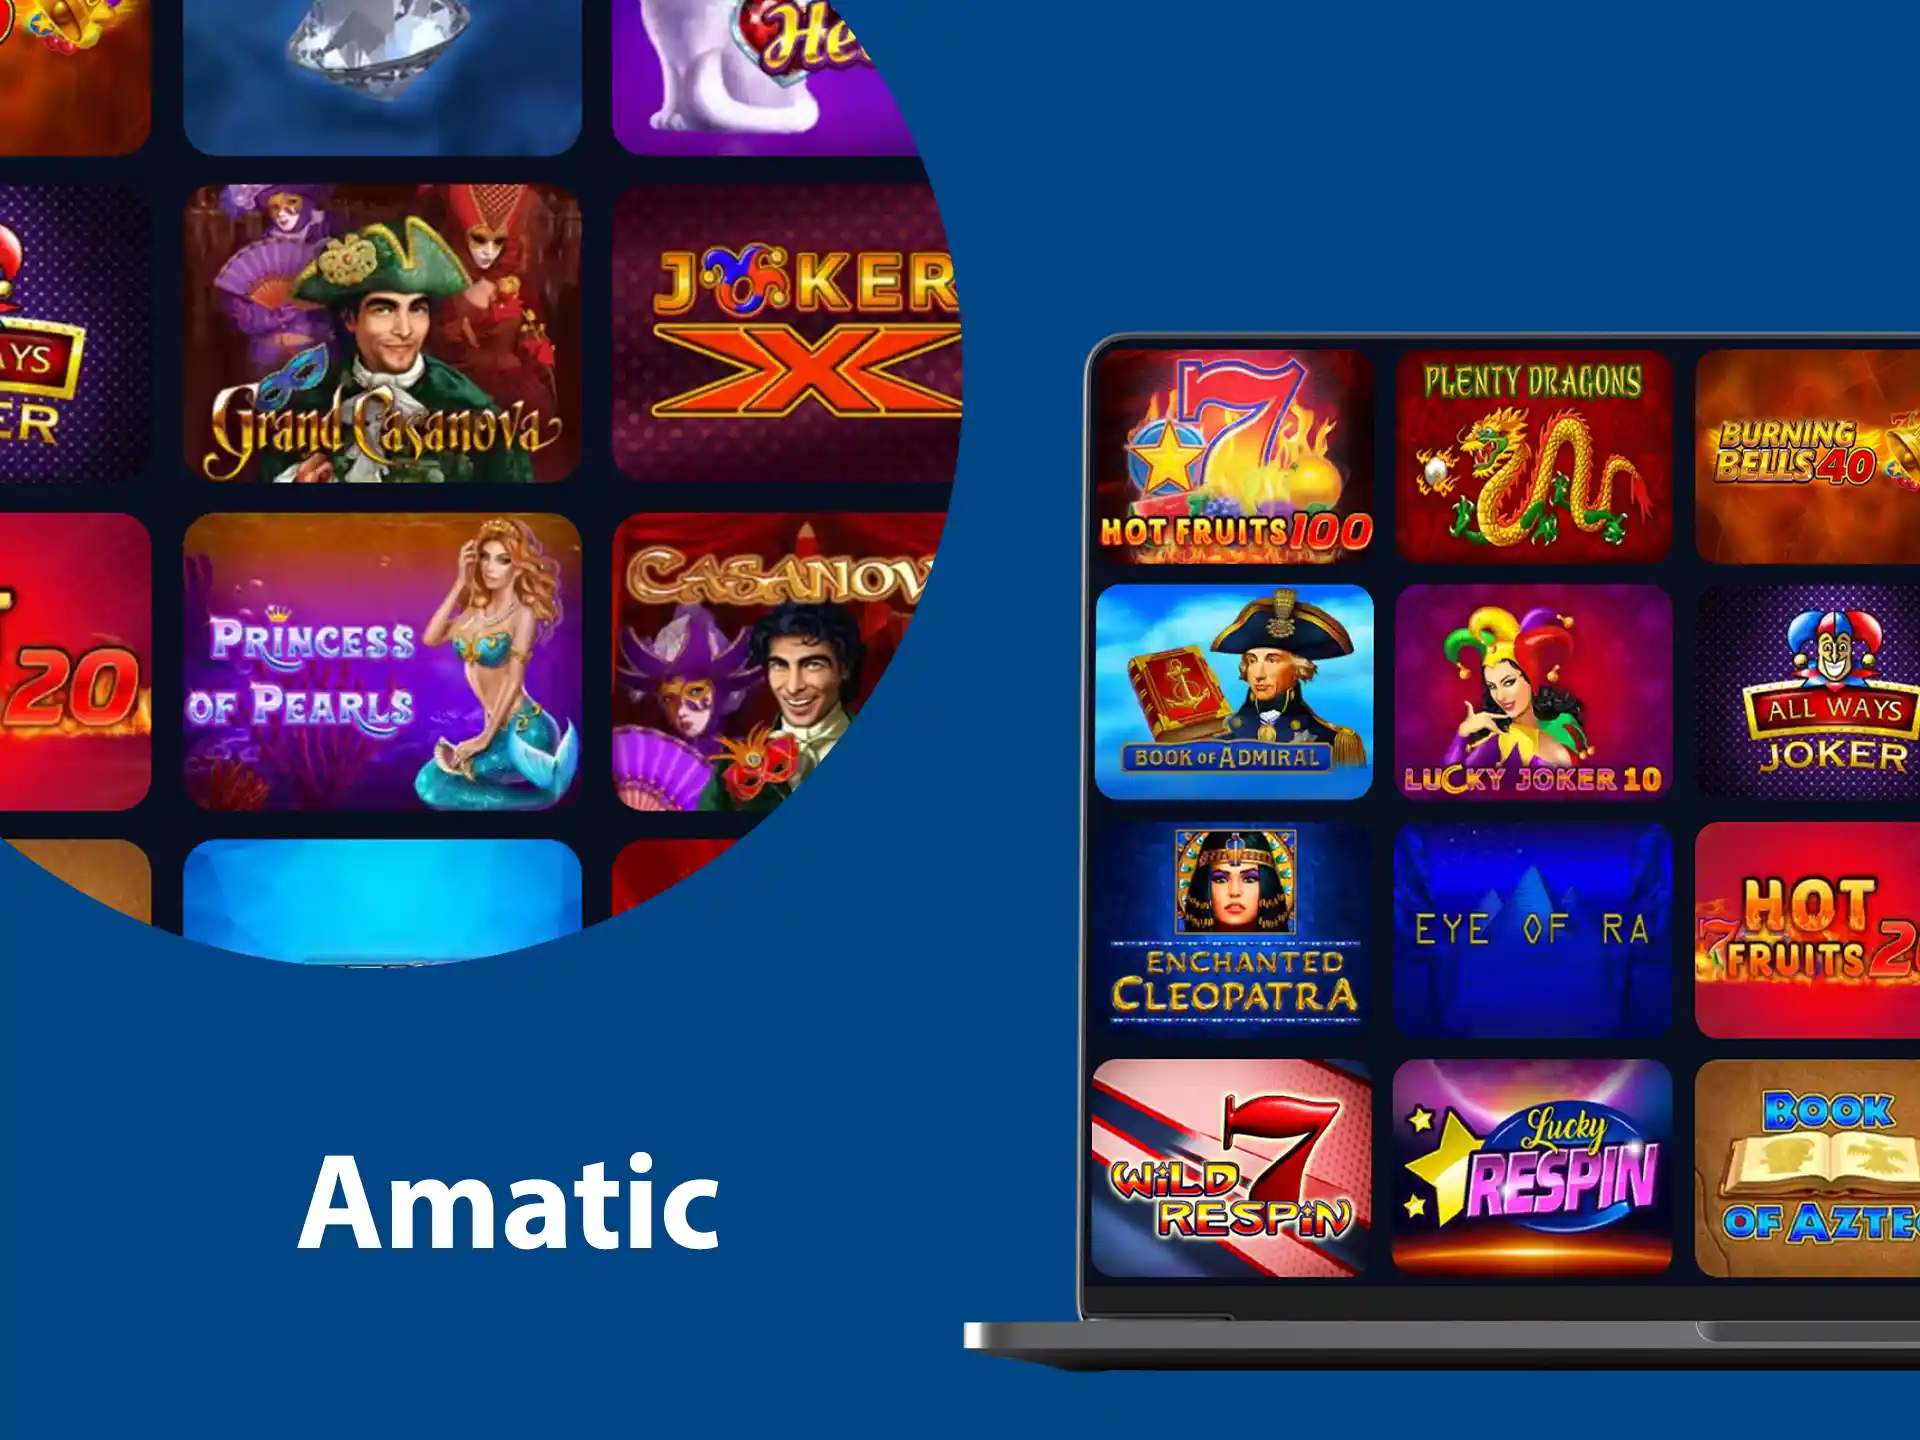 Amatic has developed slot machines, table games and offers quality games and services to casinos.